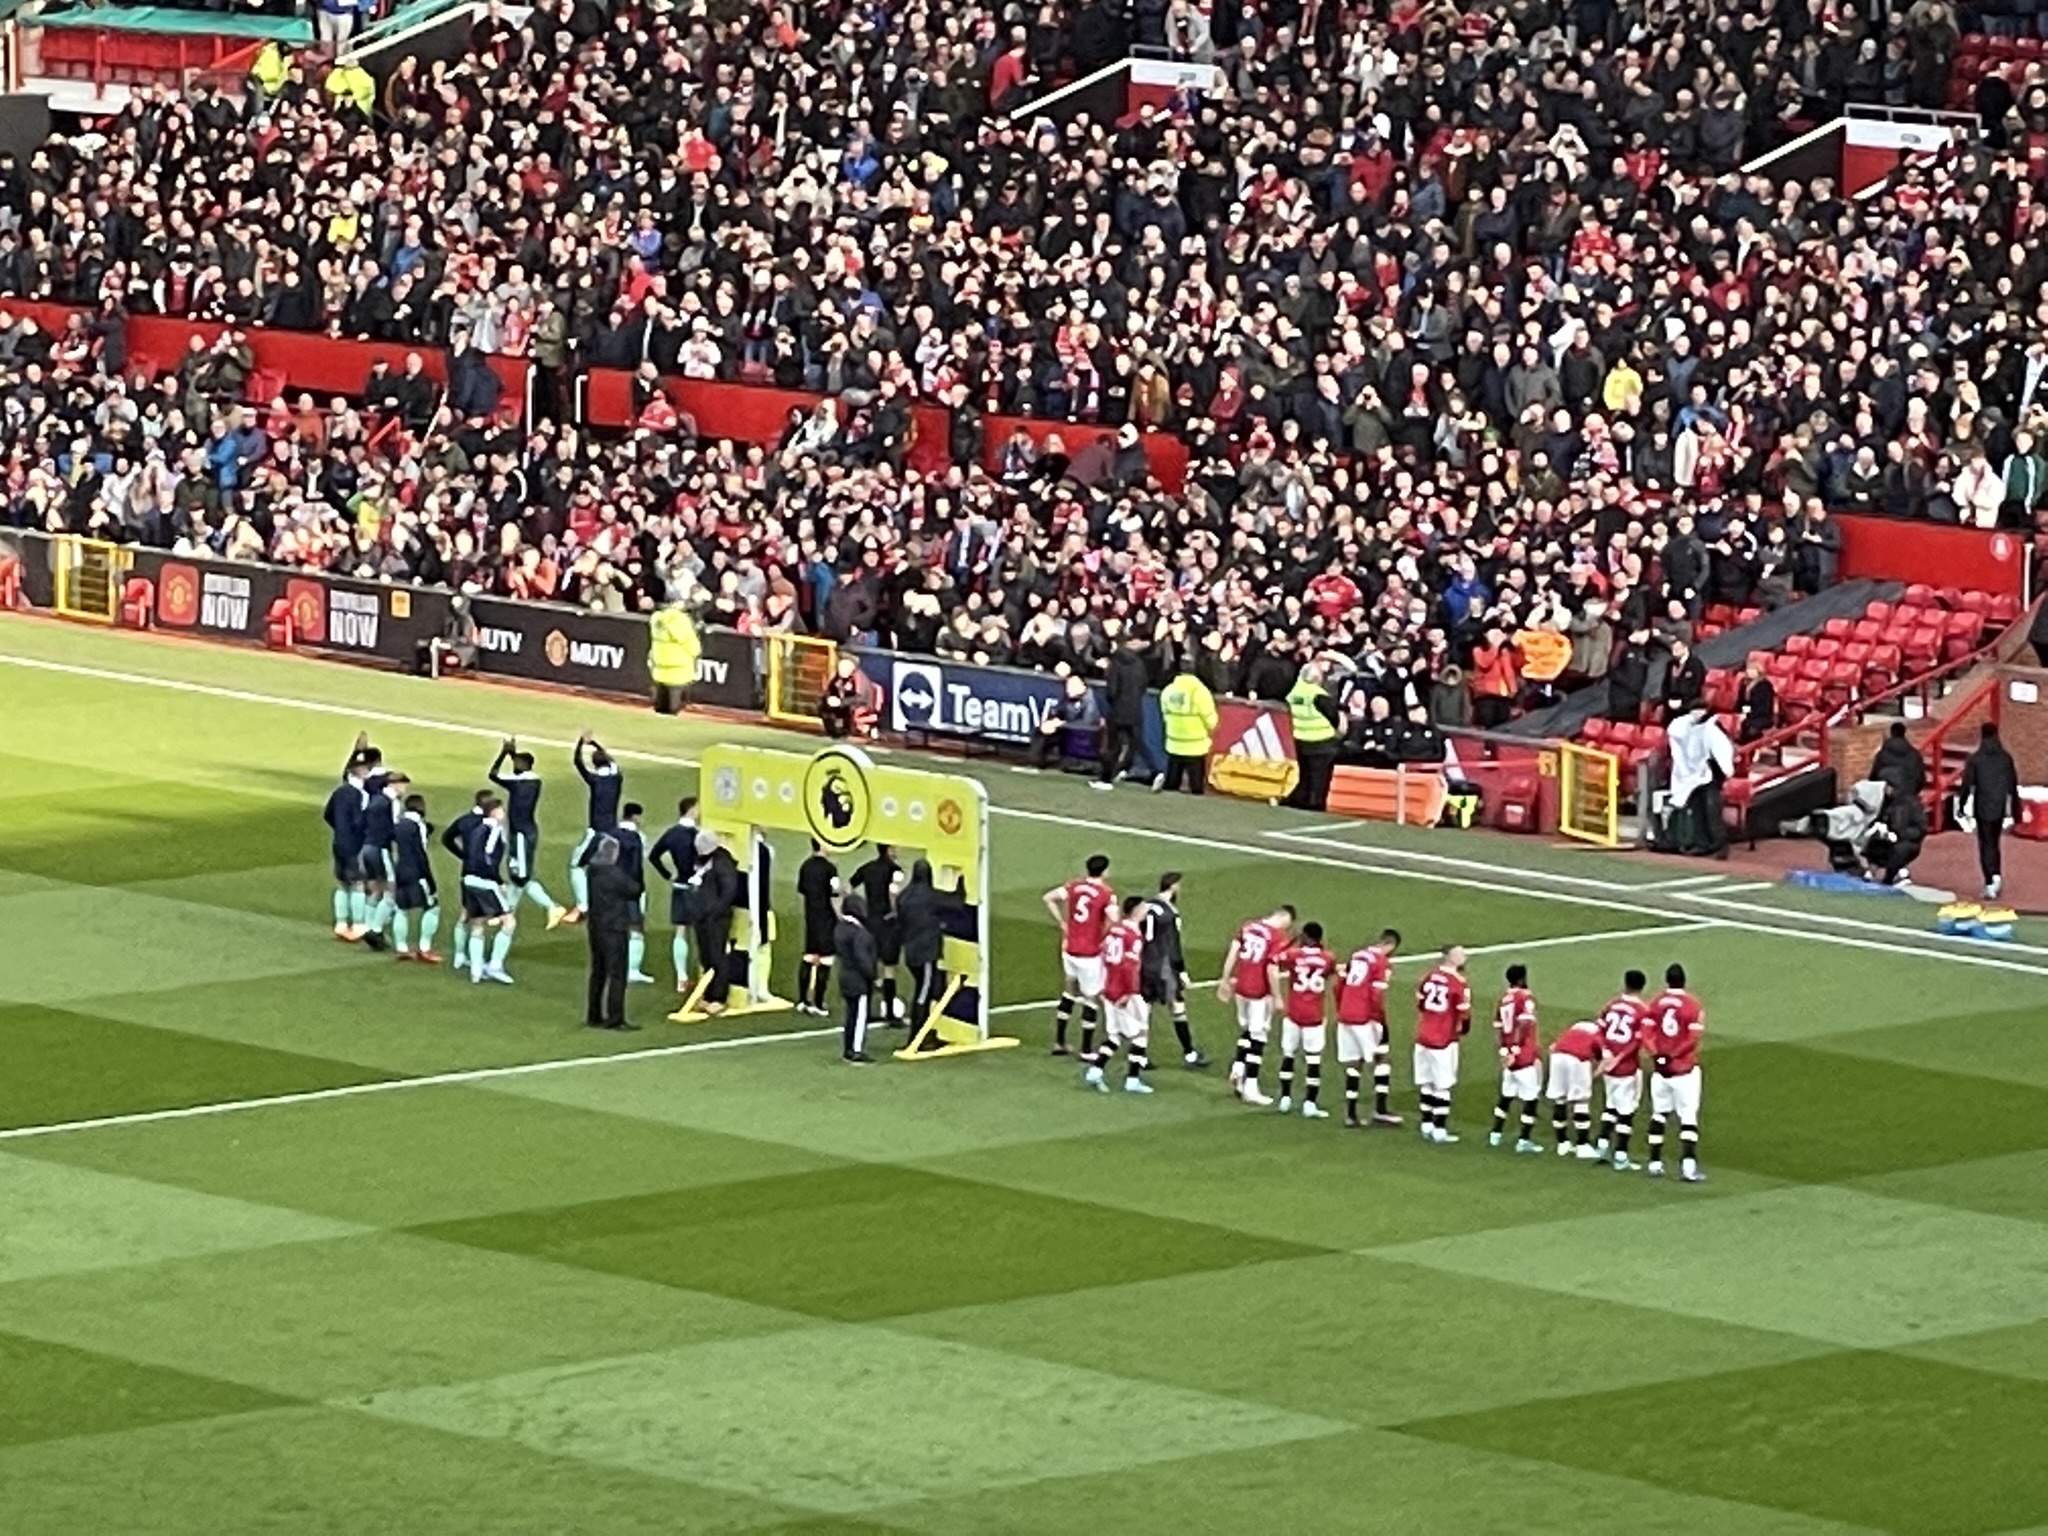 Manchester United v Leicester City - Saturday 2nd April 2022 image 2